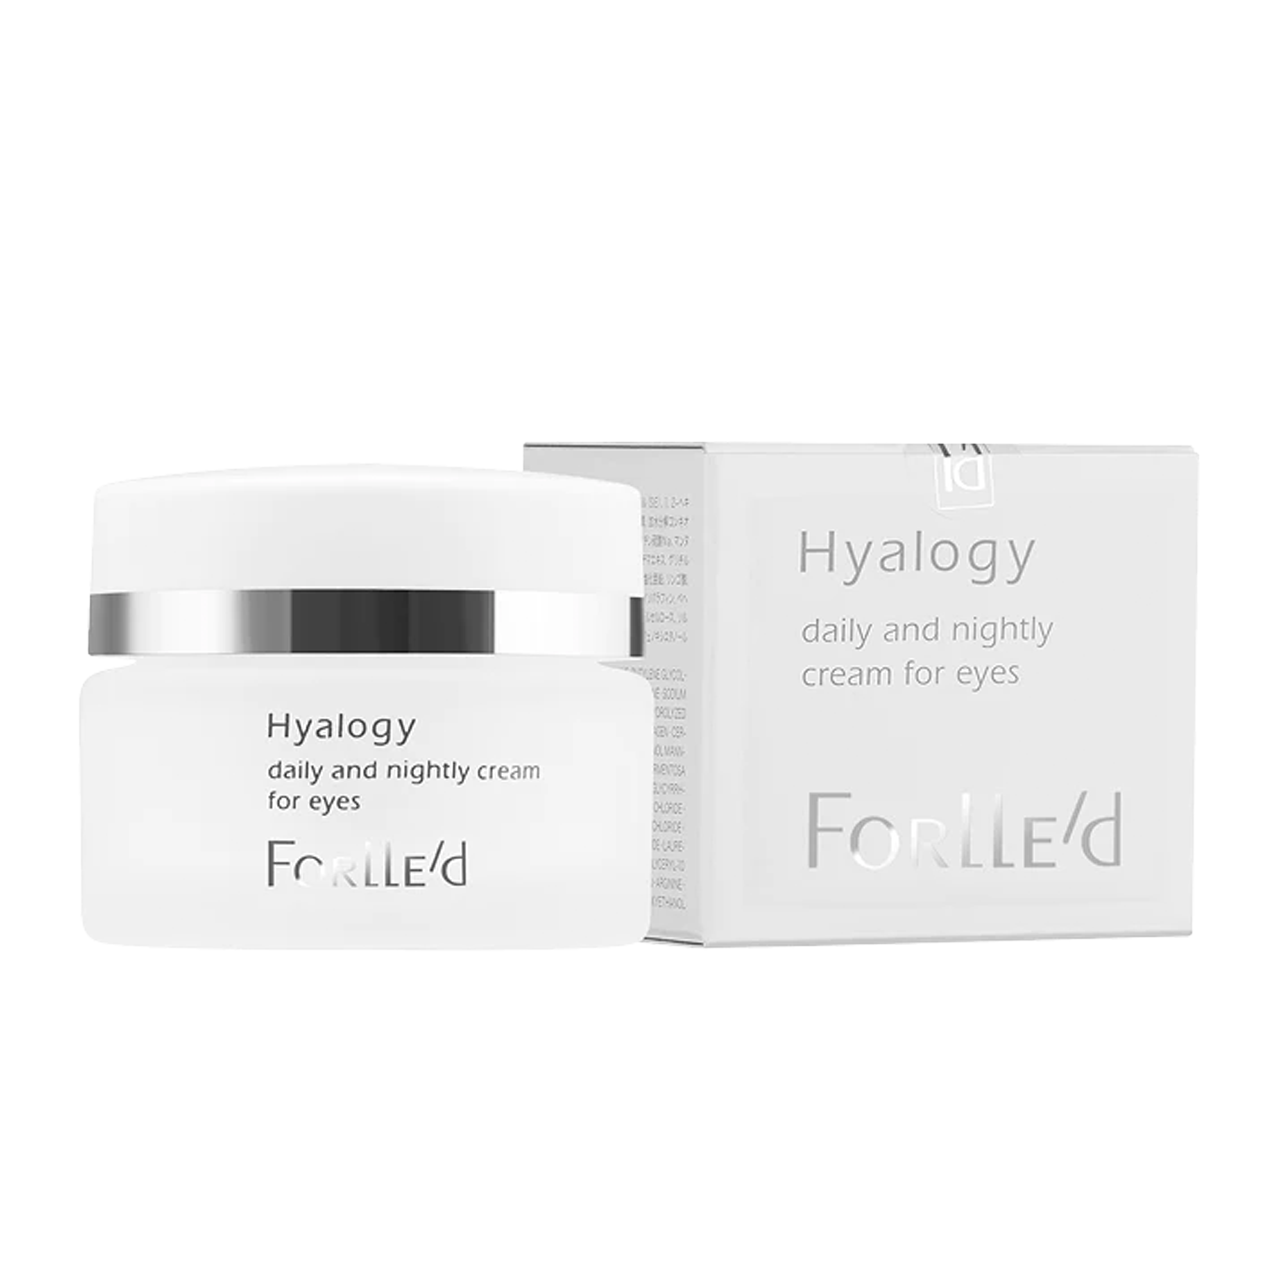 Forlled Hyalogy Daily and Nightly Cream for Eyes